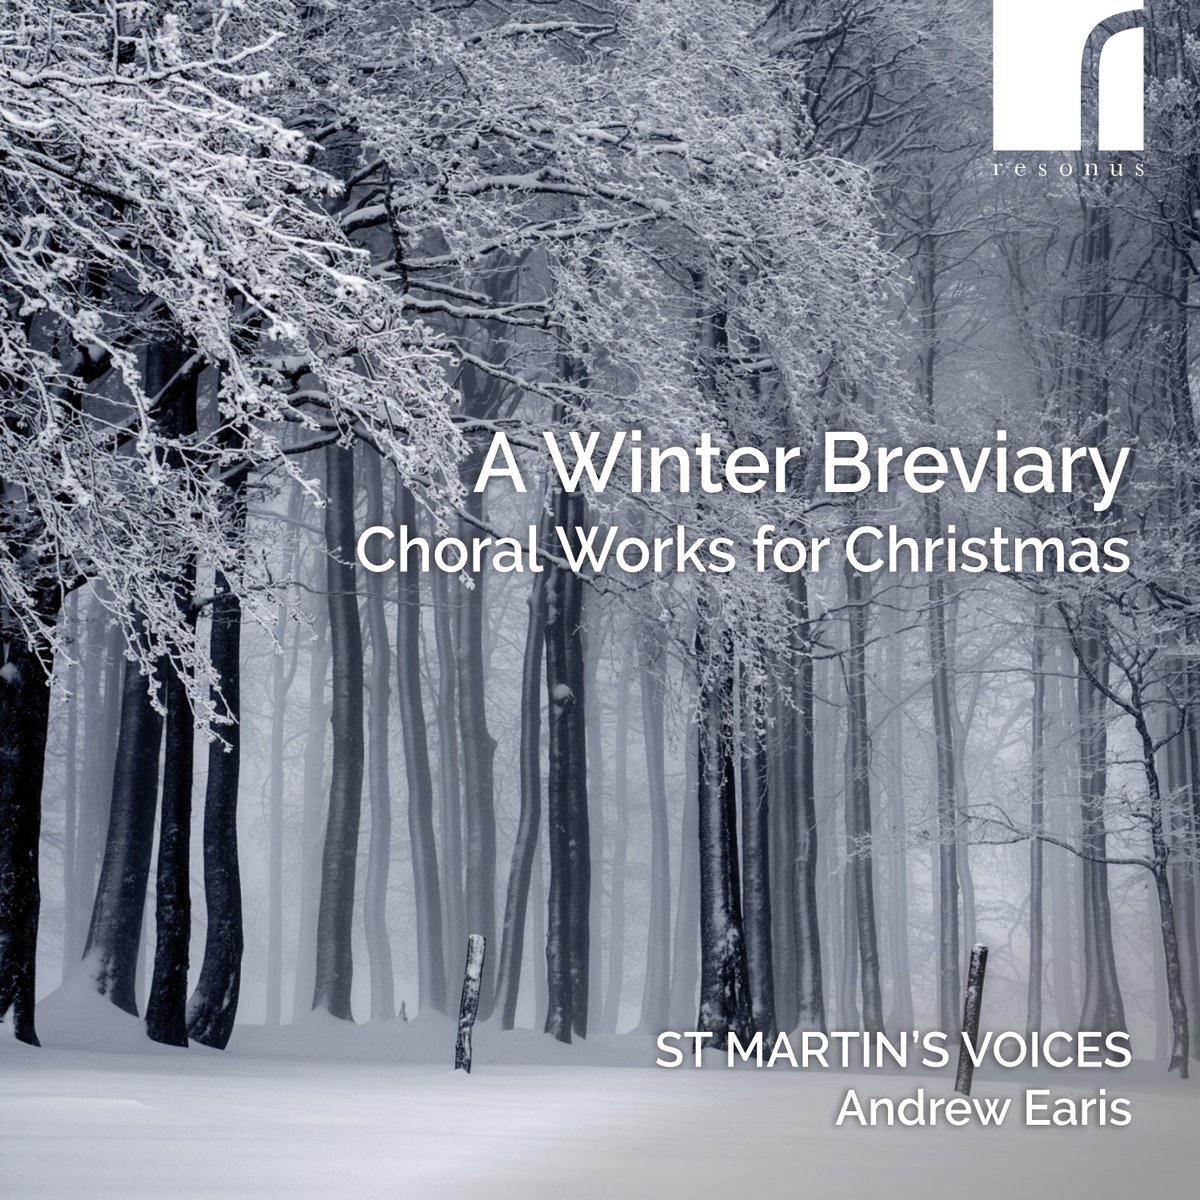 Time for a new Christmas choral discovery? This album from St Martin's Voices features brand new music, recorded here for the first time: apple.co/StMartinsVoices